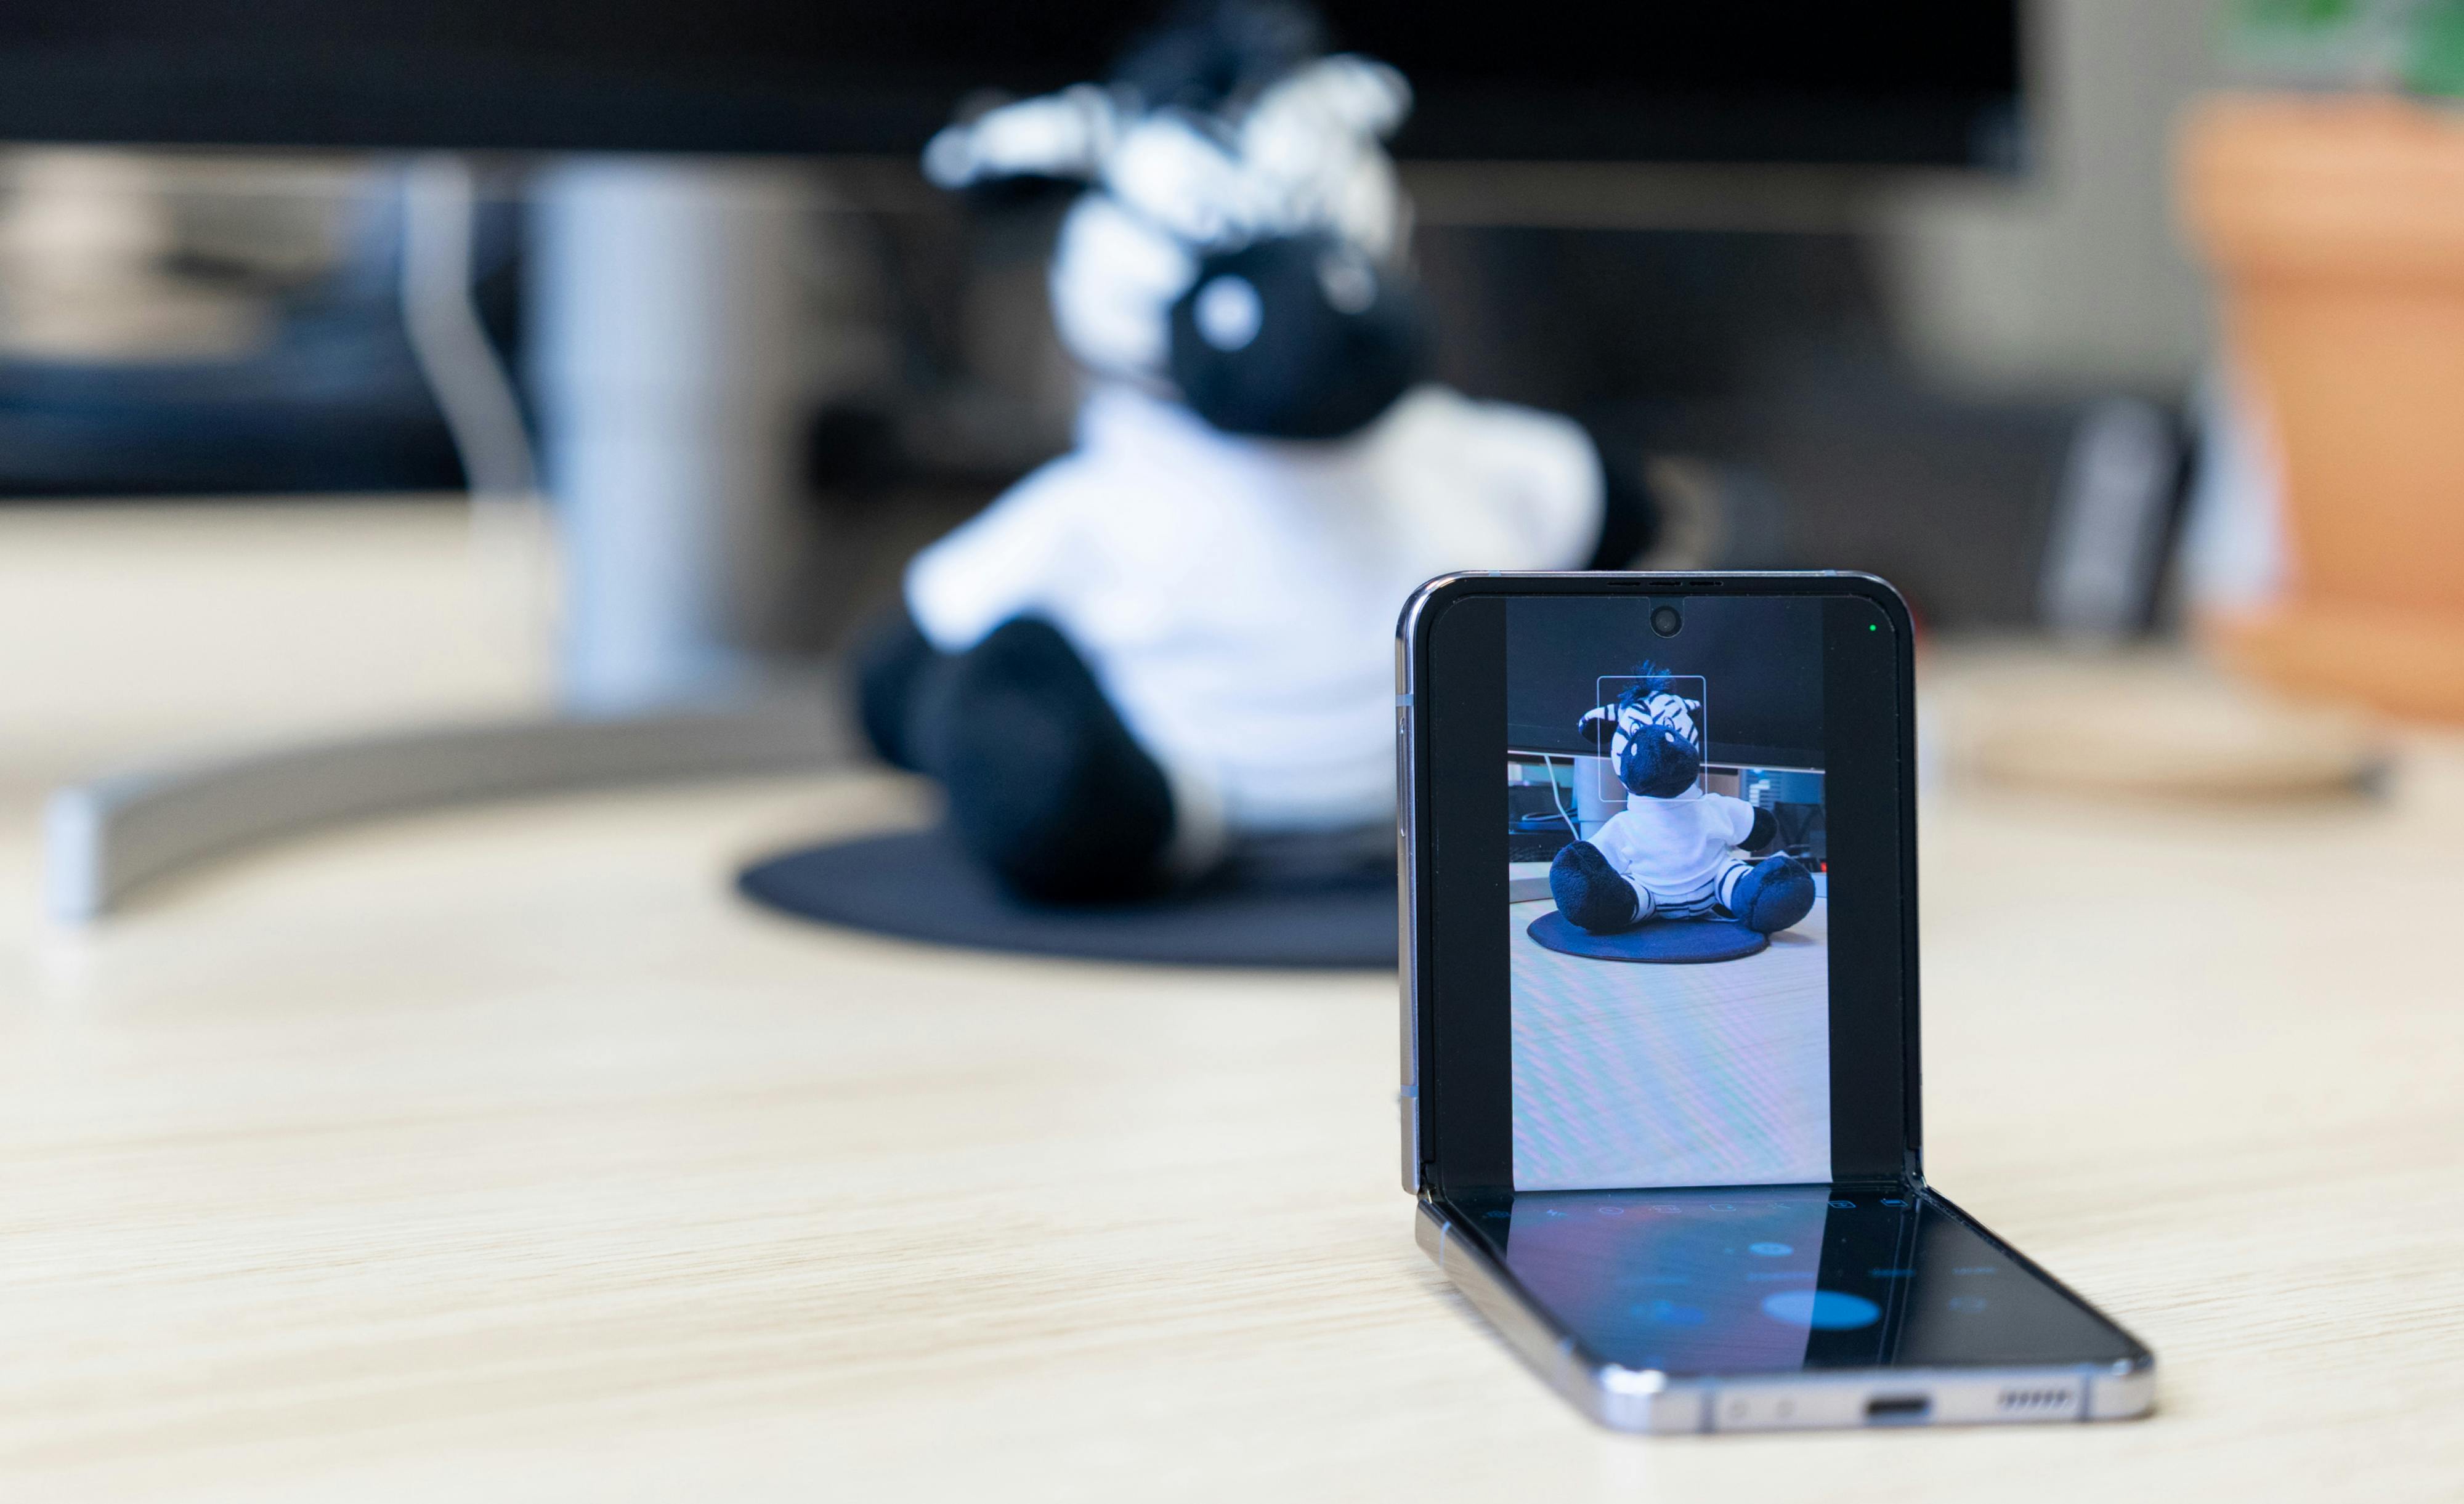 A foldable device half-folded on a desk, displaying a camera taking a picture of a plush zebra toy sitting in the background, illustrating the Flex Mode feature.